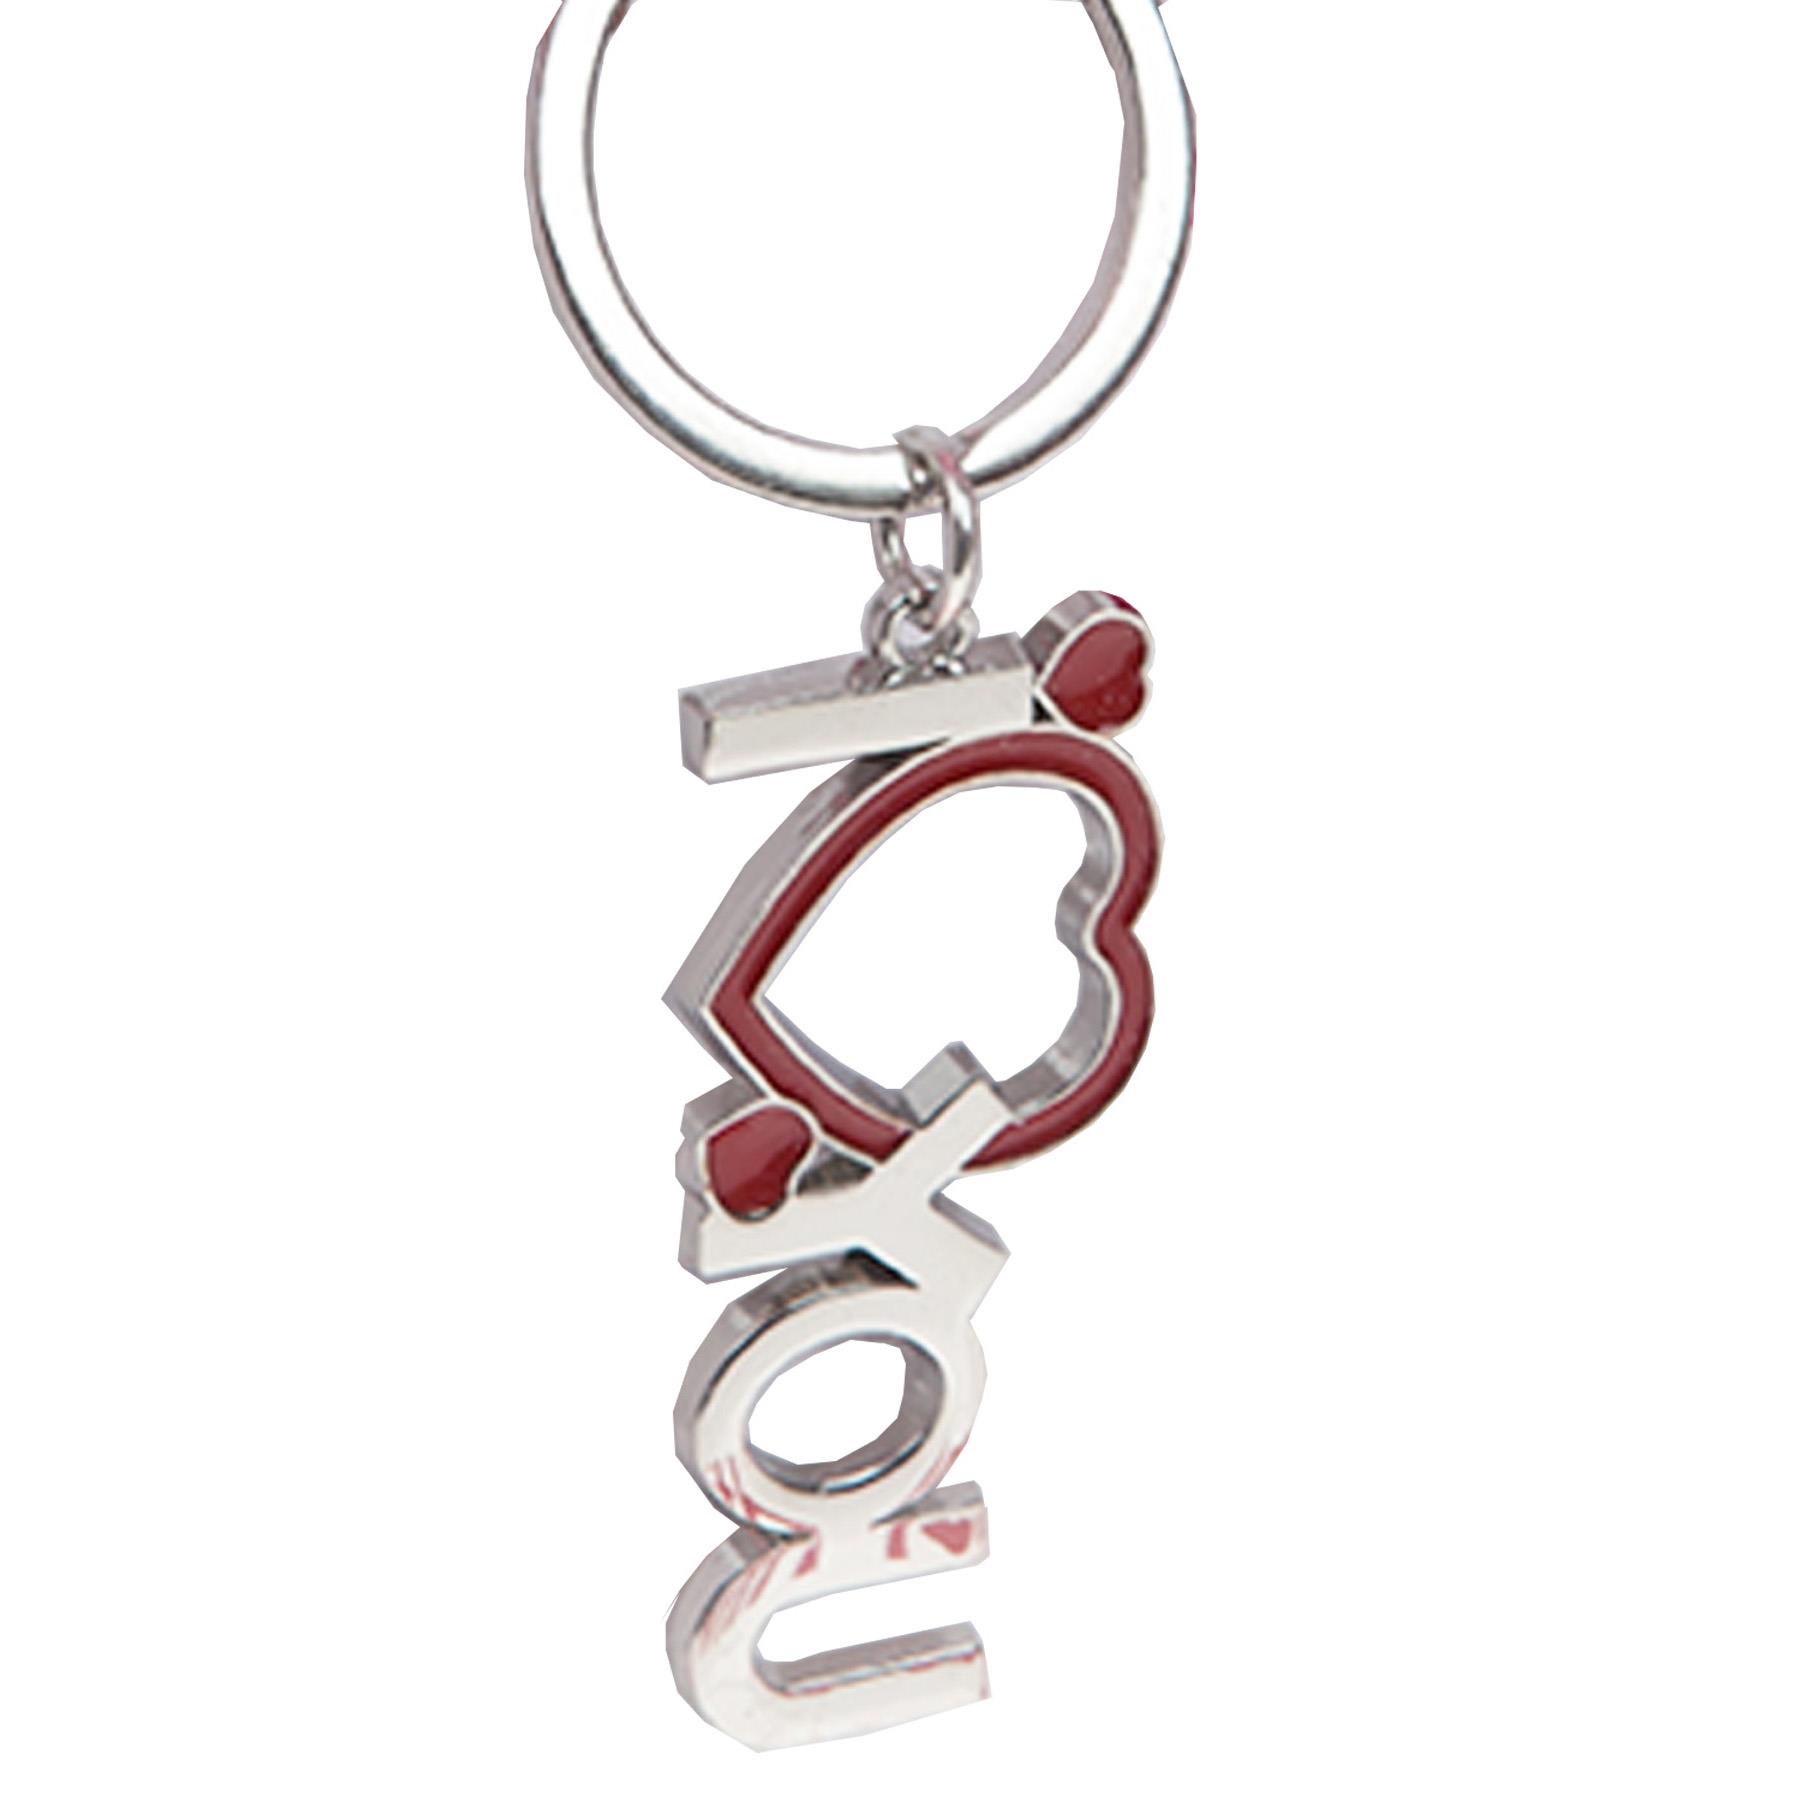 'I Love You' with Heart Key Ring - Valentine's Day / Birthday Gift